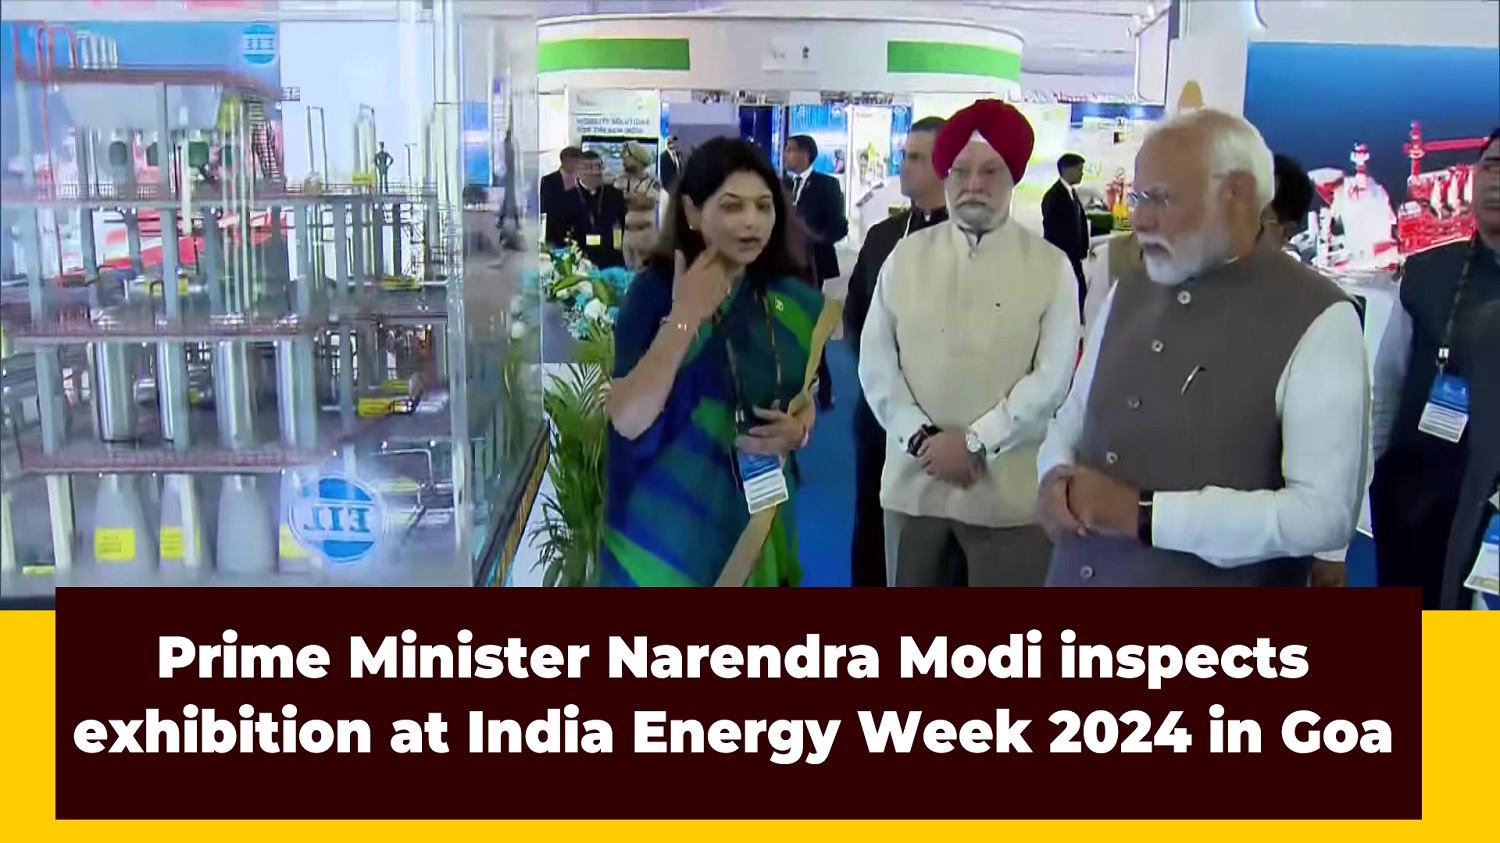 Prime Minister Narendra Modi inspects exhibition at India Energy Week 2024 in Goa